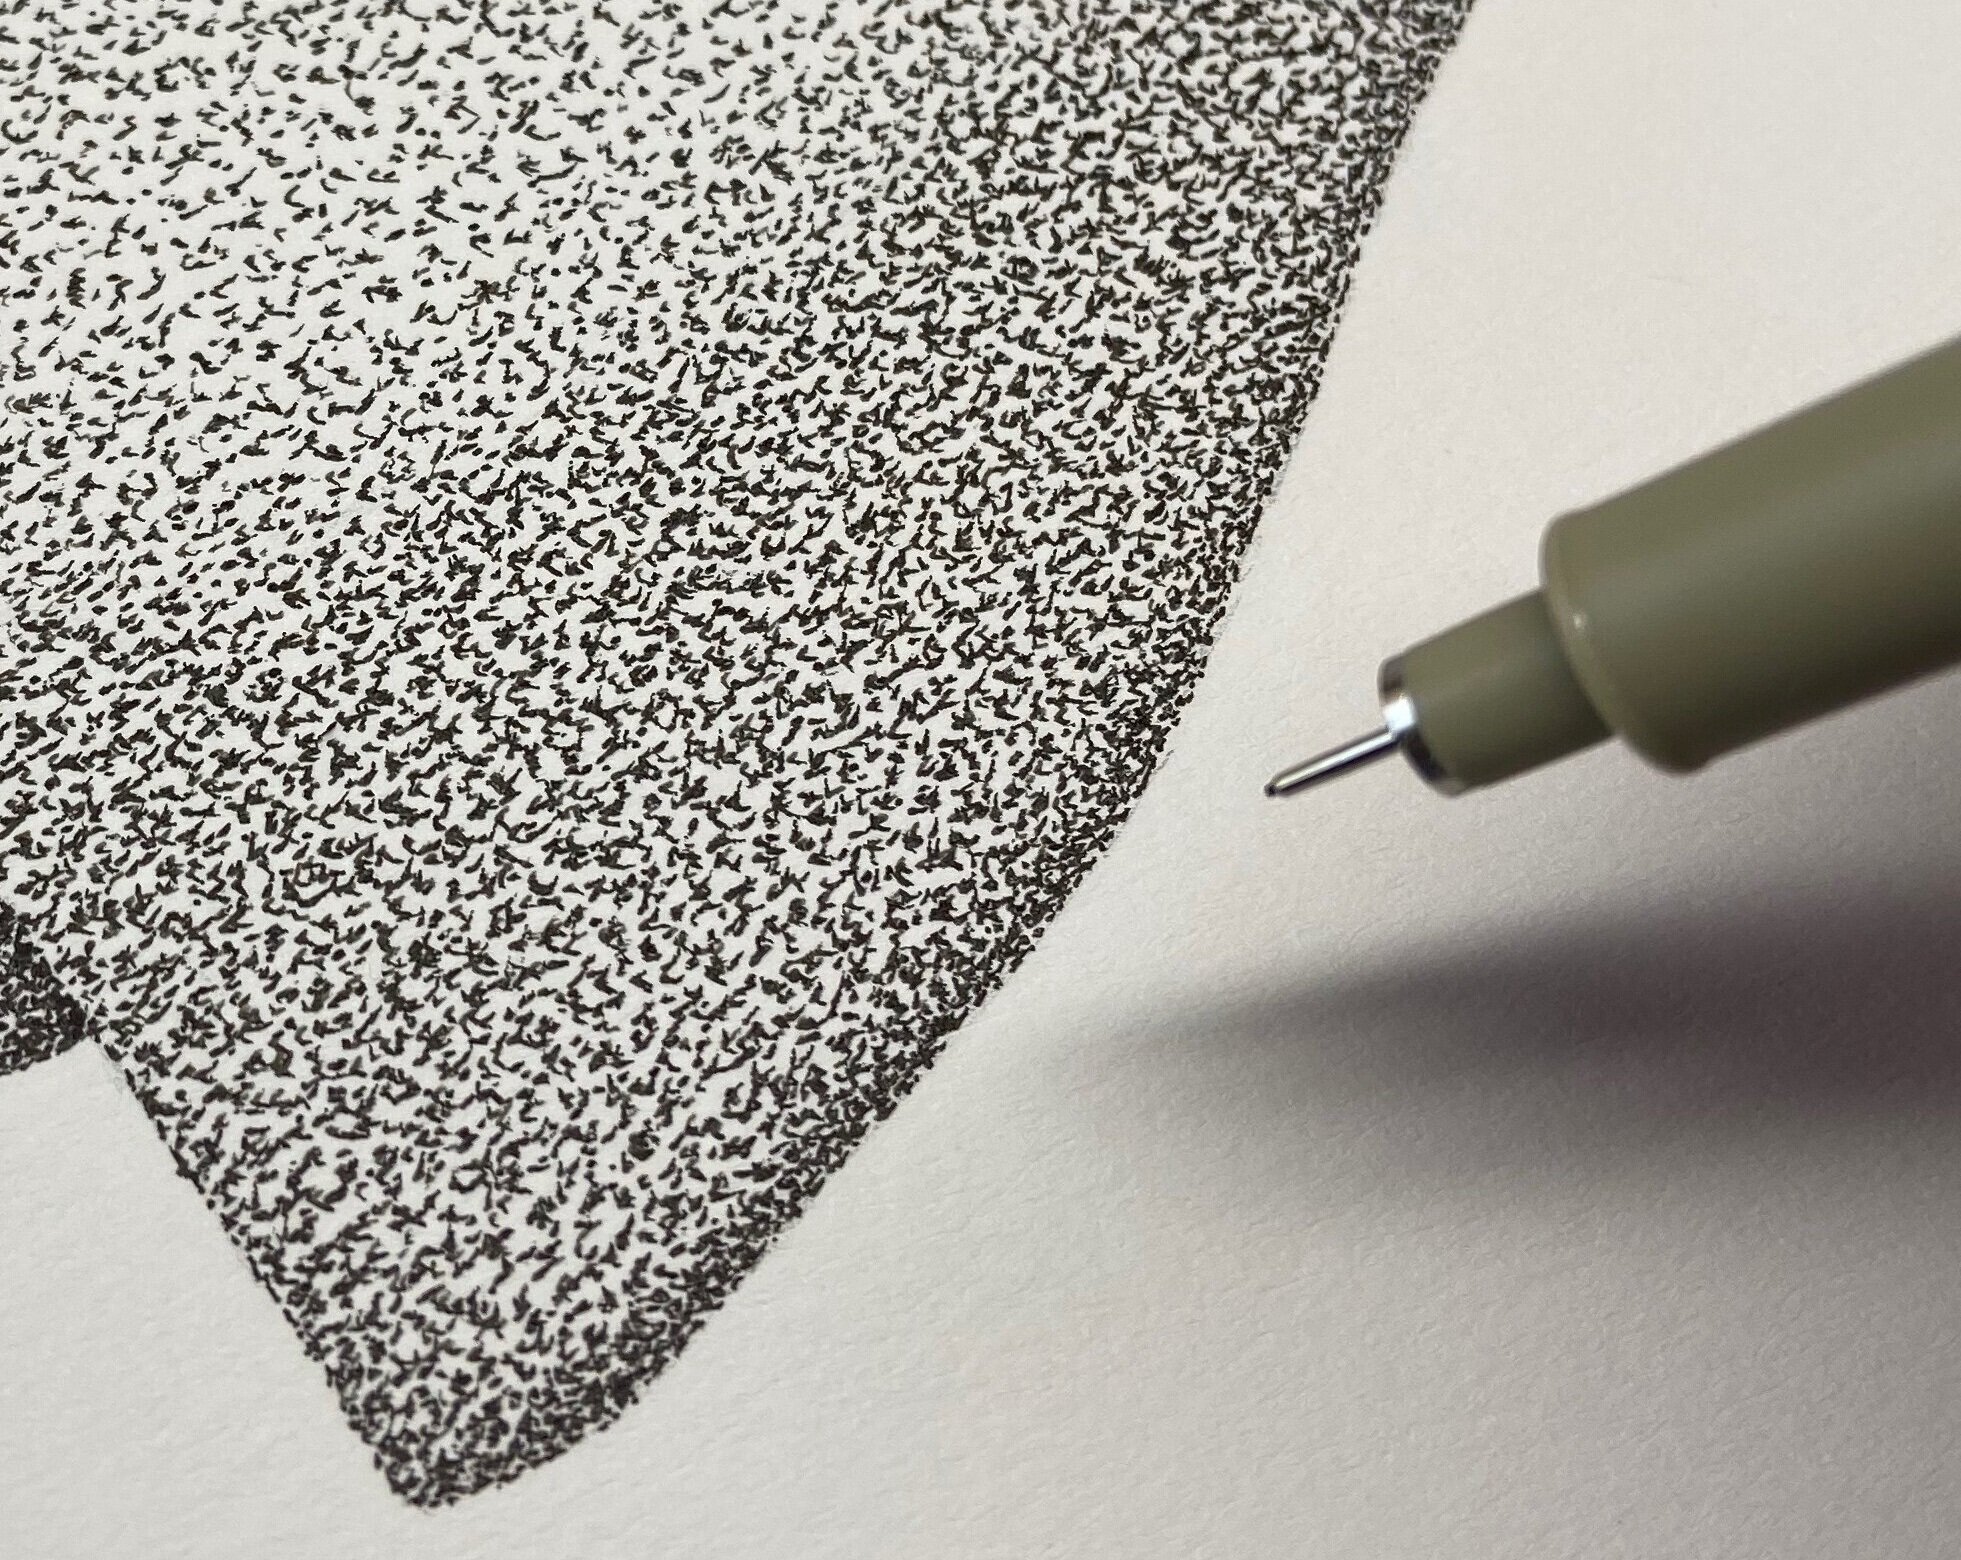 How to stipple